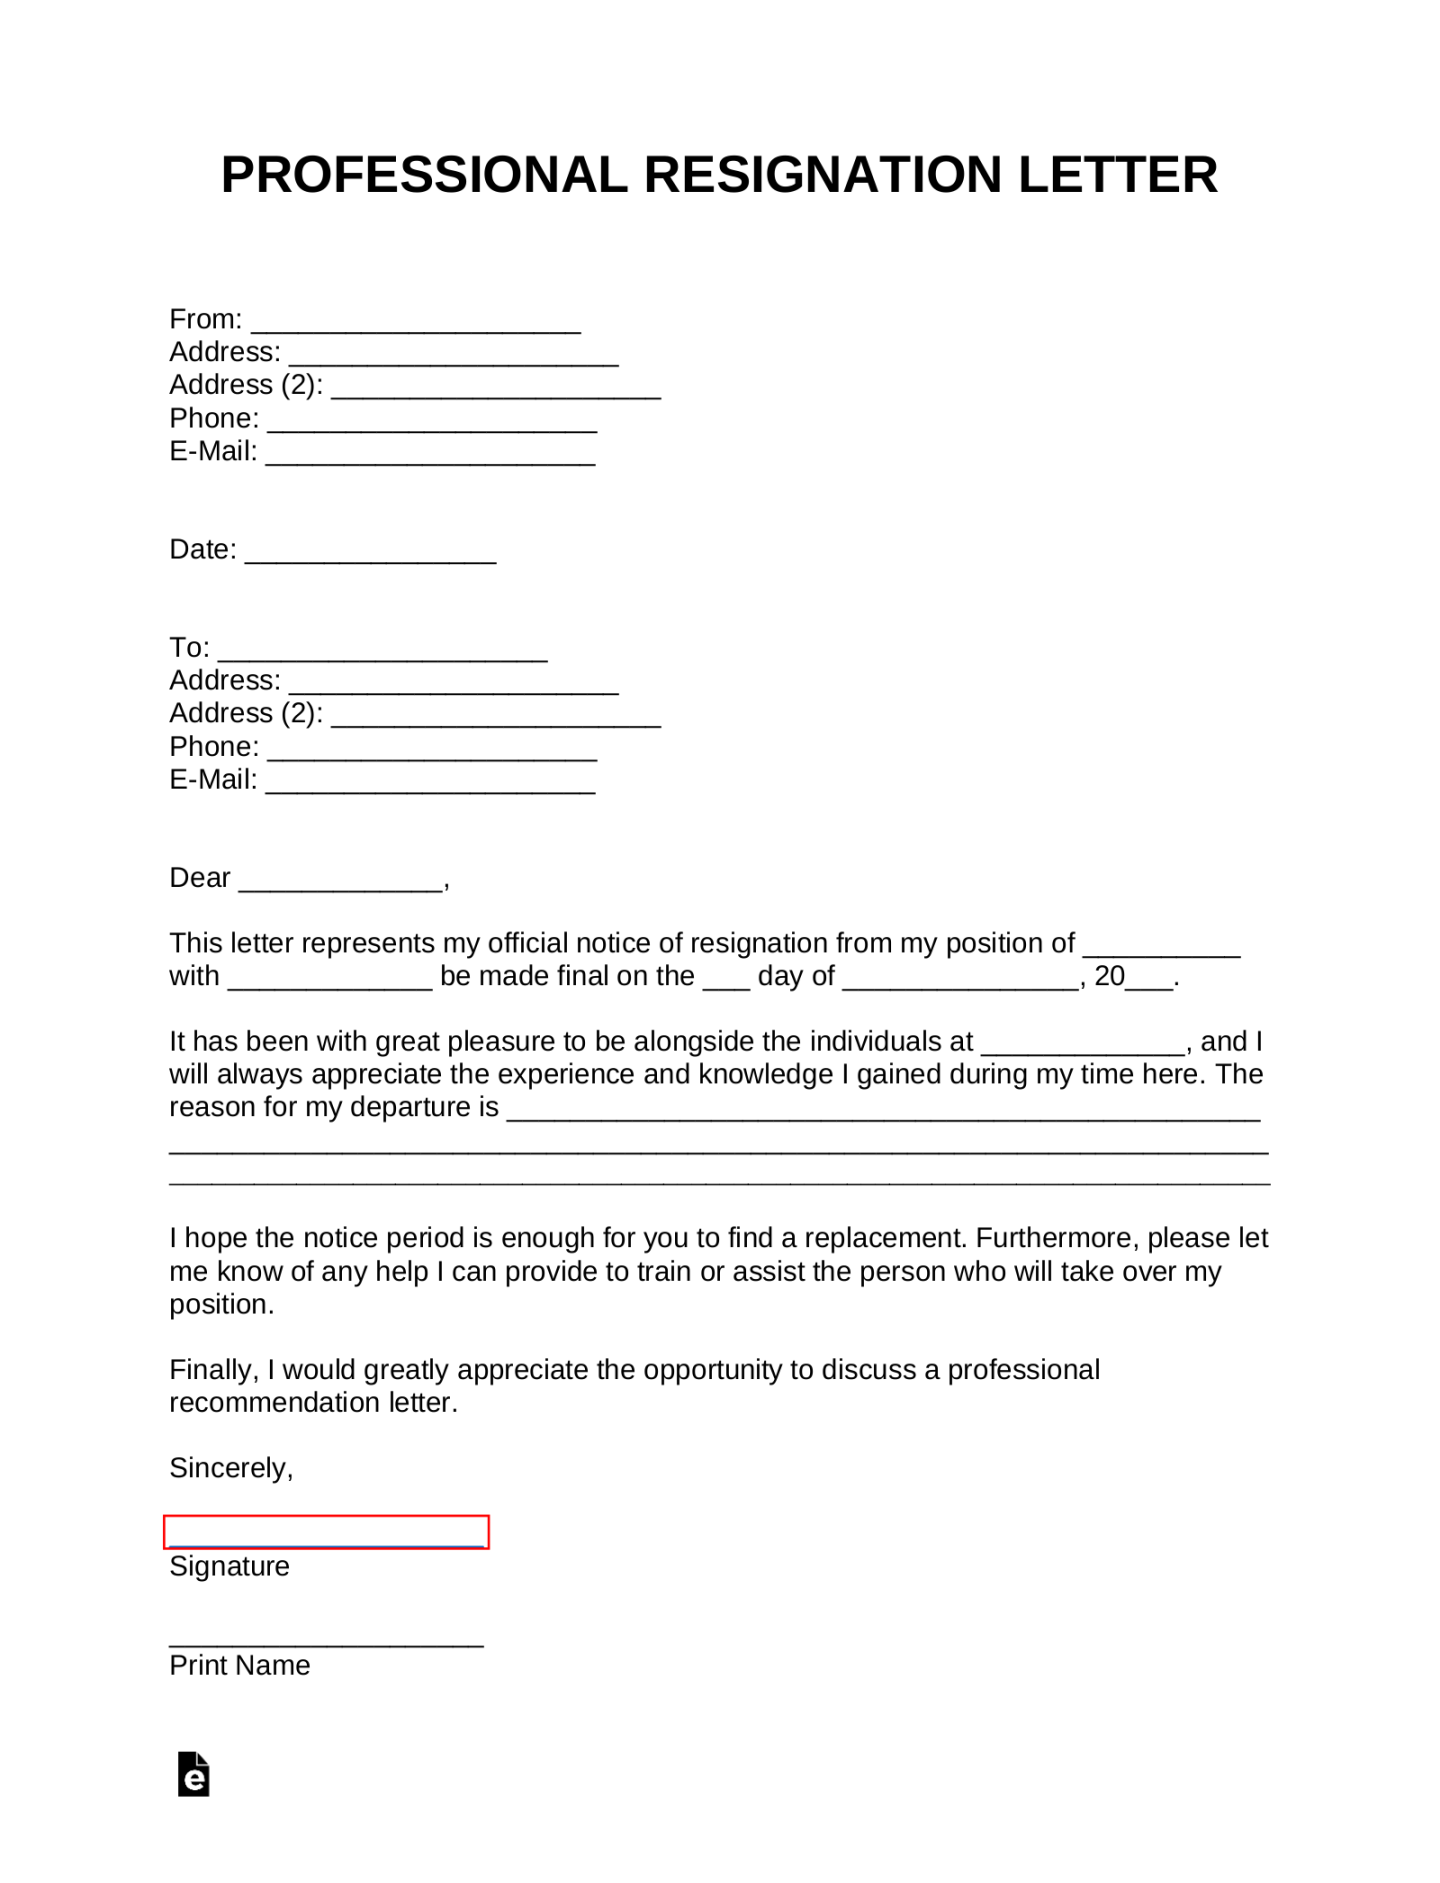 Free Professional Resignation Letter Template - with Samples - PDF